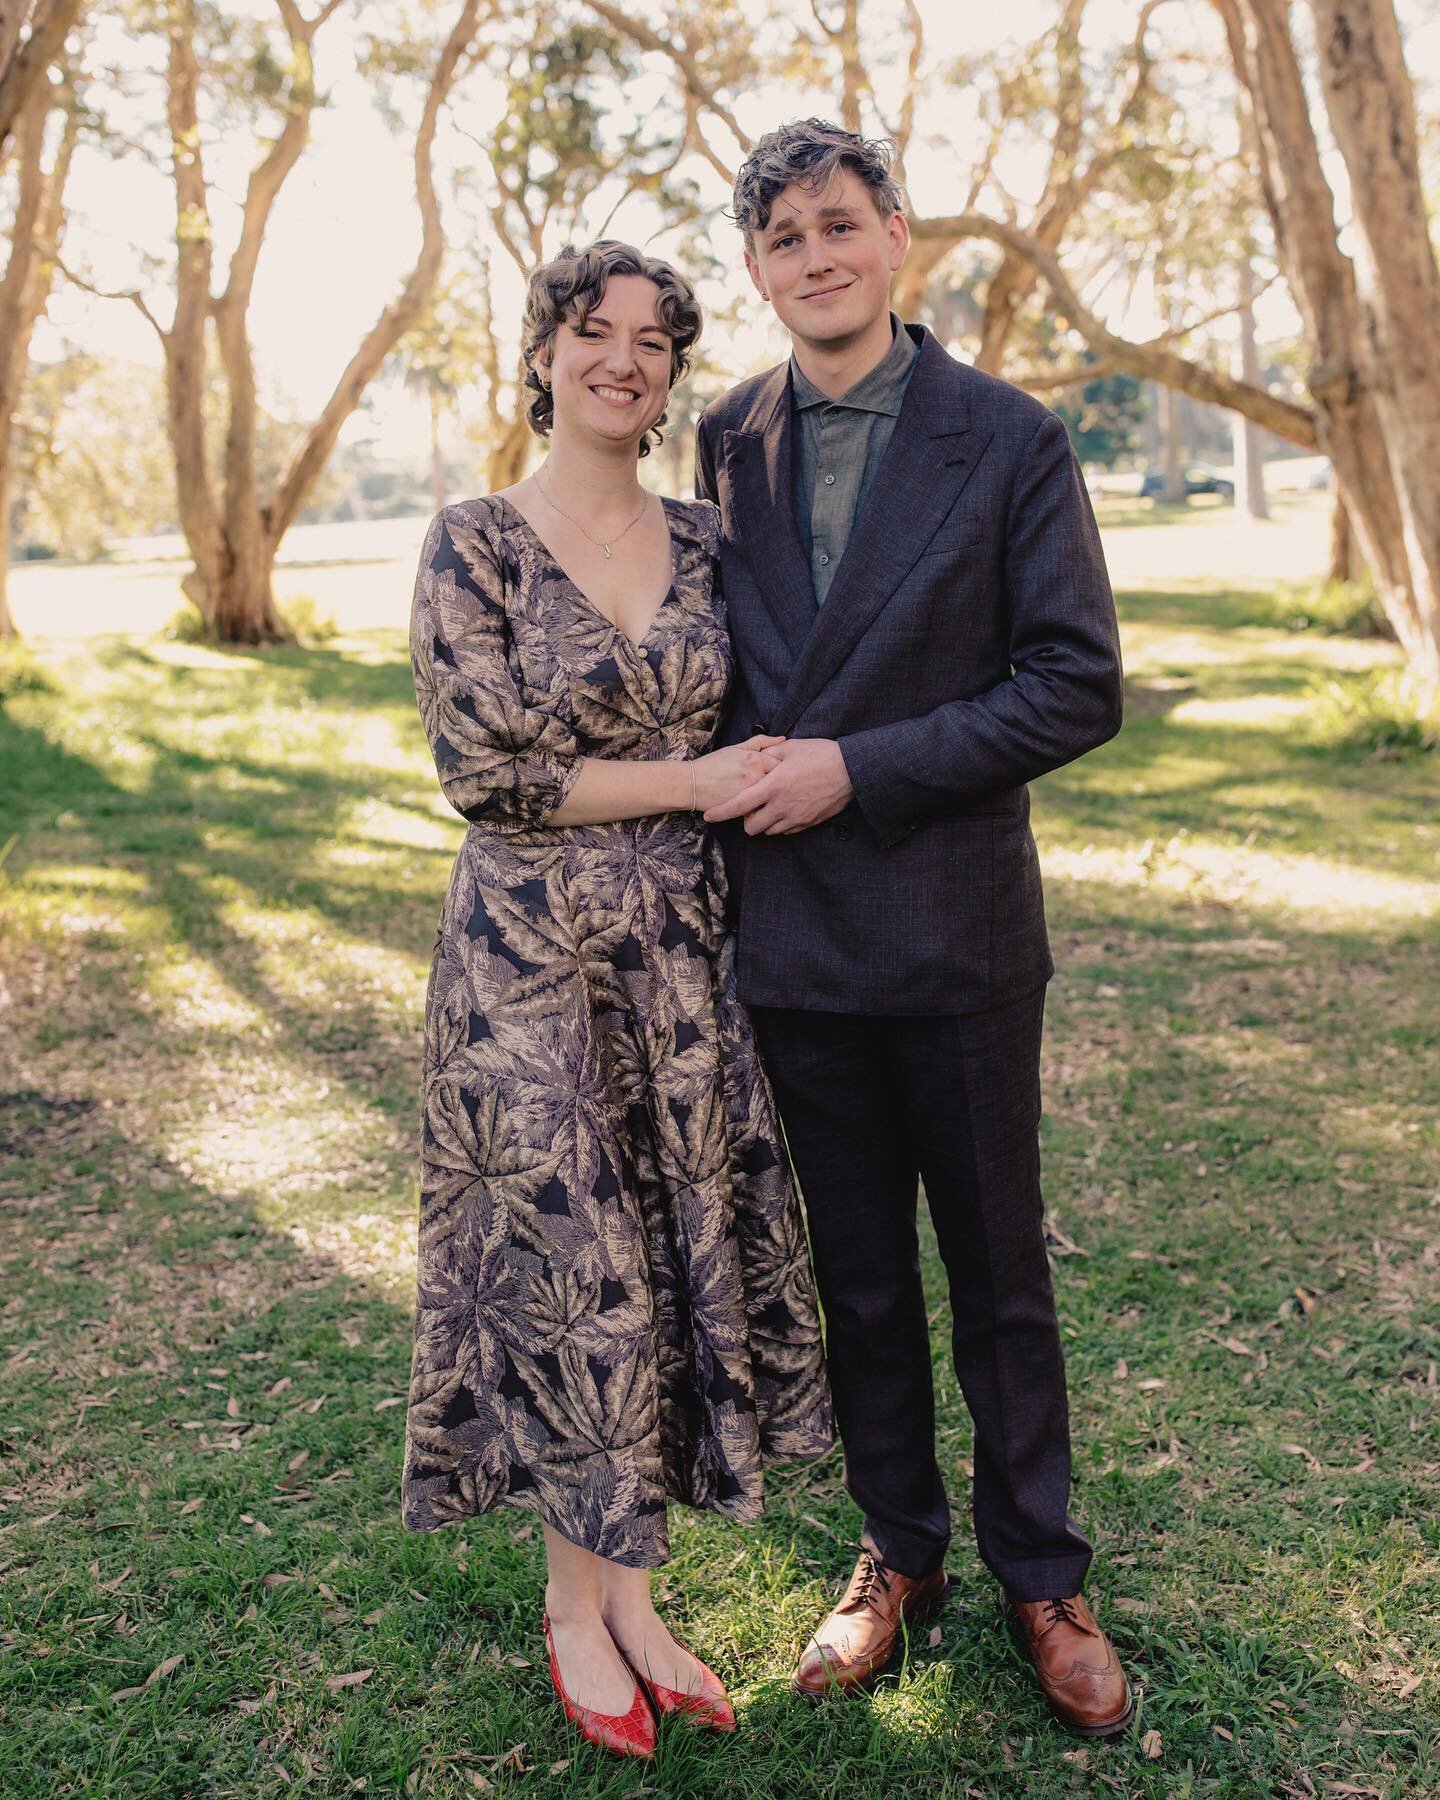 Kalina ❤️ Jack
These lovers married in front of a handful of their nearest dearest in Centennial Park, Sydney.
.
Low key but damn SPECTACULAR with those stunning shoes!! 👠👠 🙌🏼
.
Celebrant words by the wonderful @alisonthecelebrant 
.
Photography 